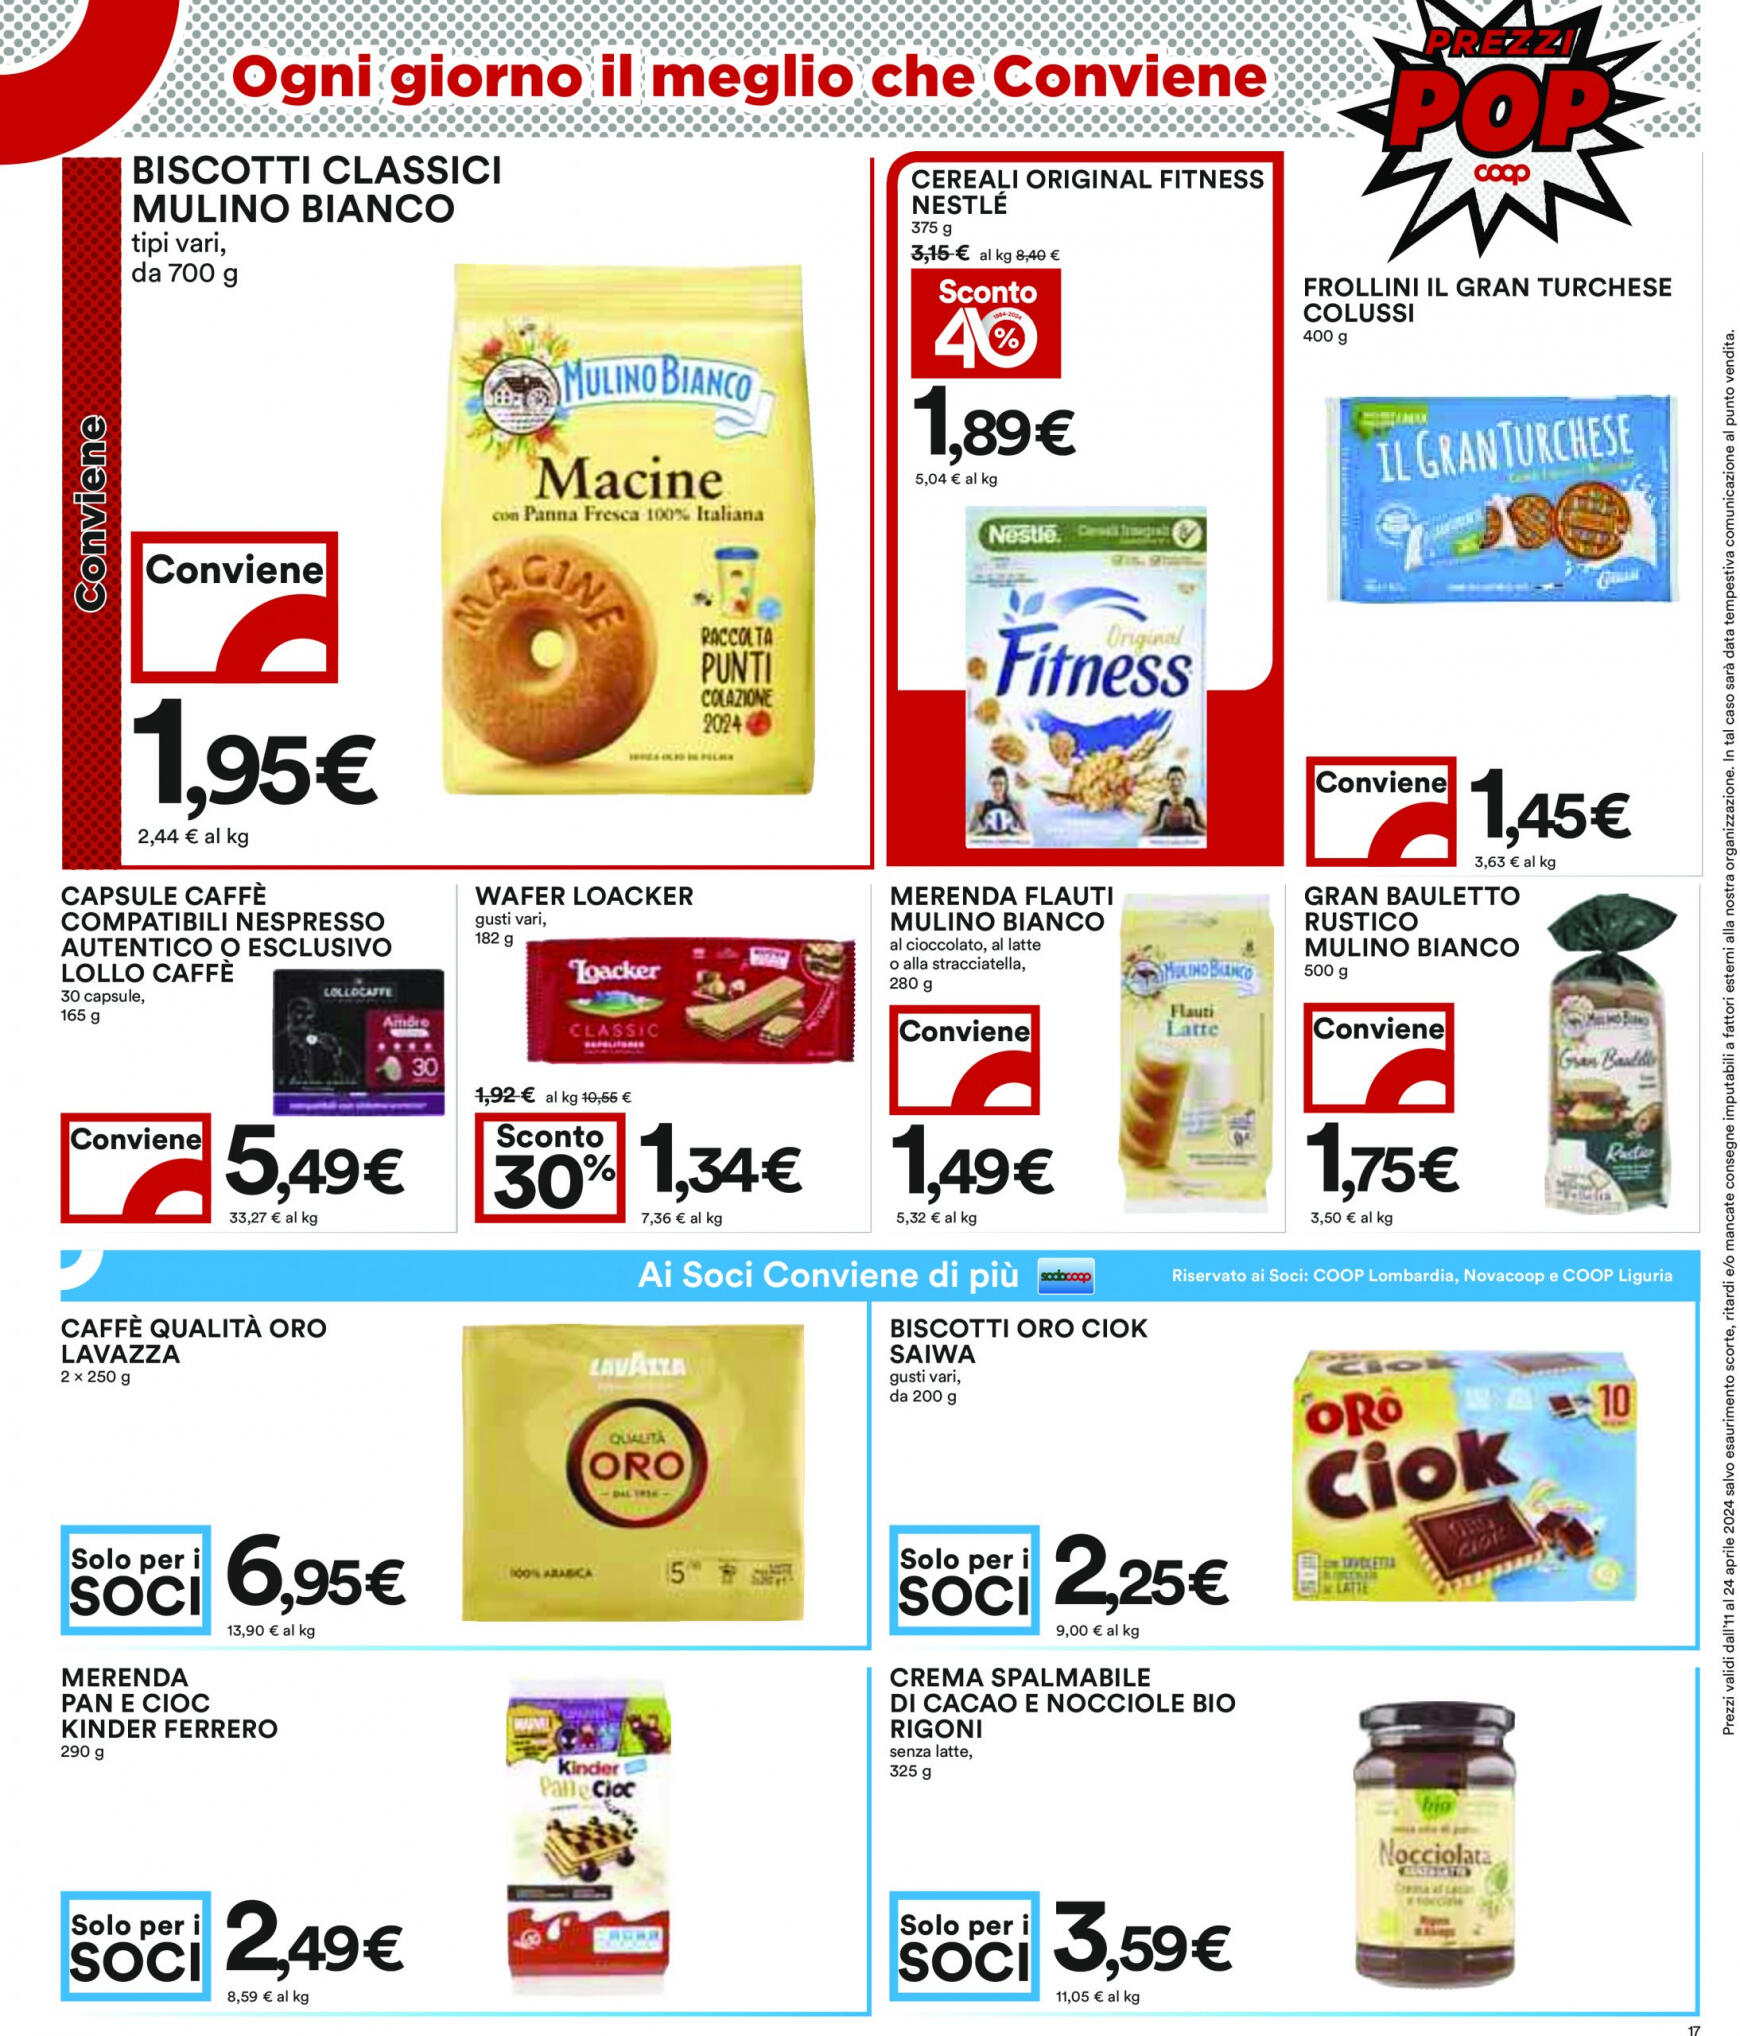 coop - Nuovo volantino Coop 11.04. - 24.04. - page: 17